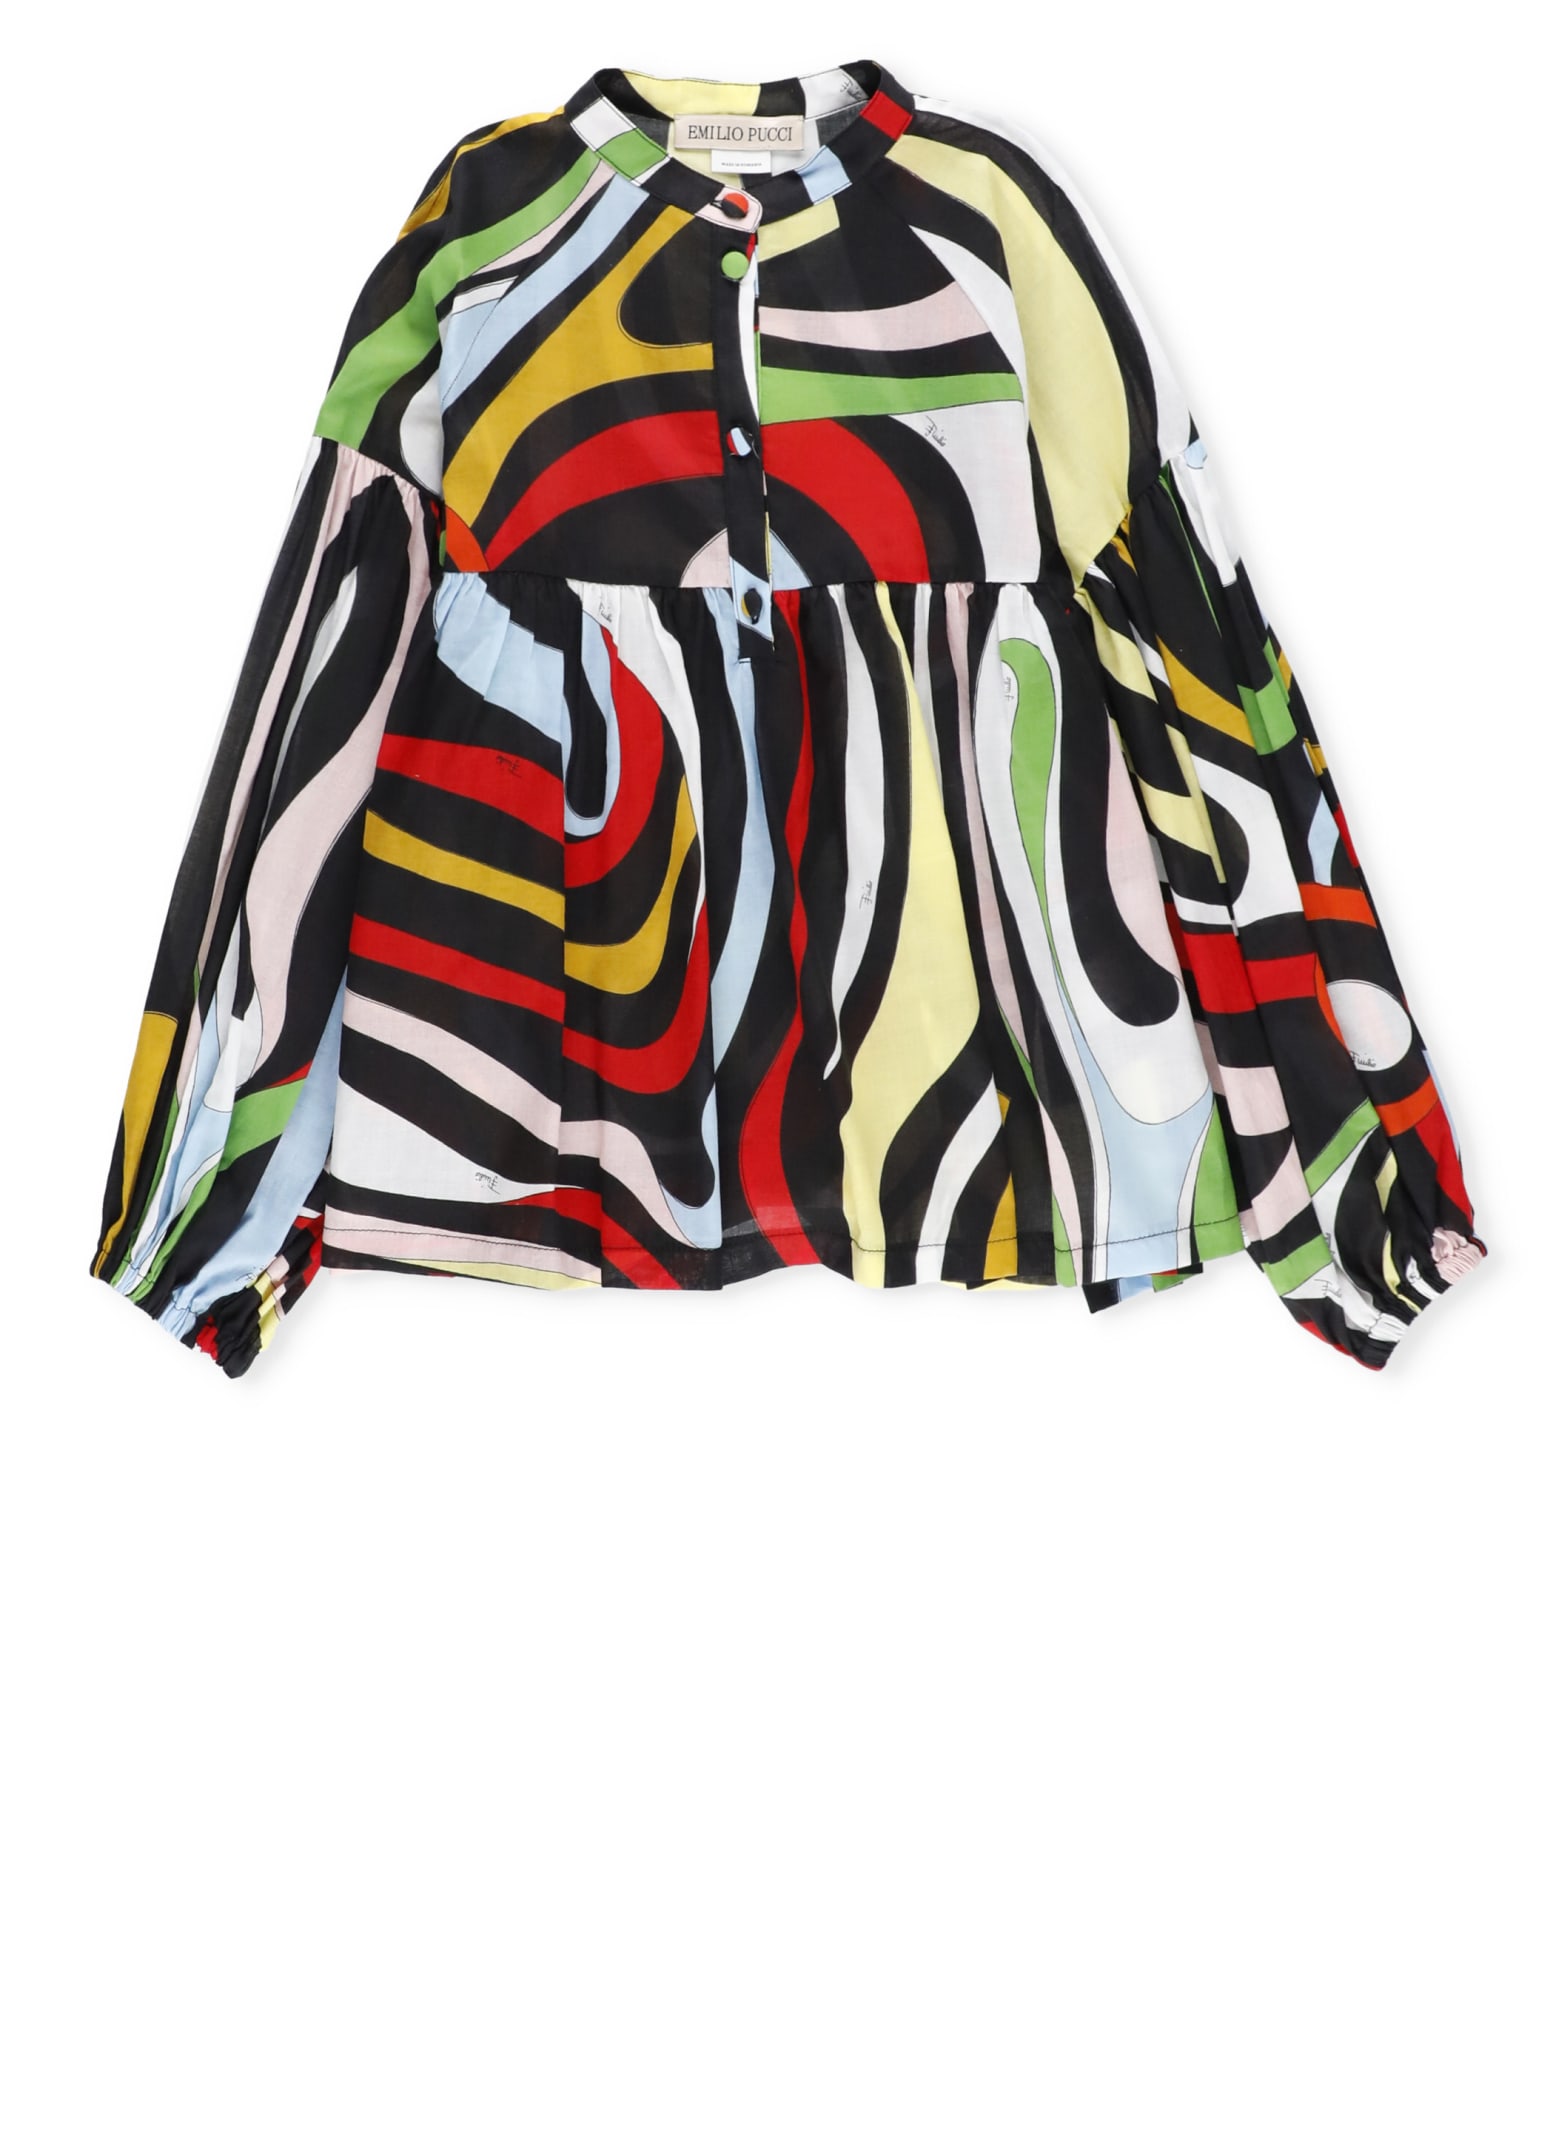 EMILIO PUCCI SHIRT WITH PRINT